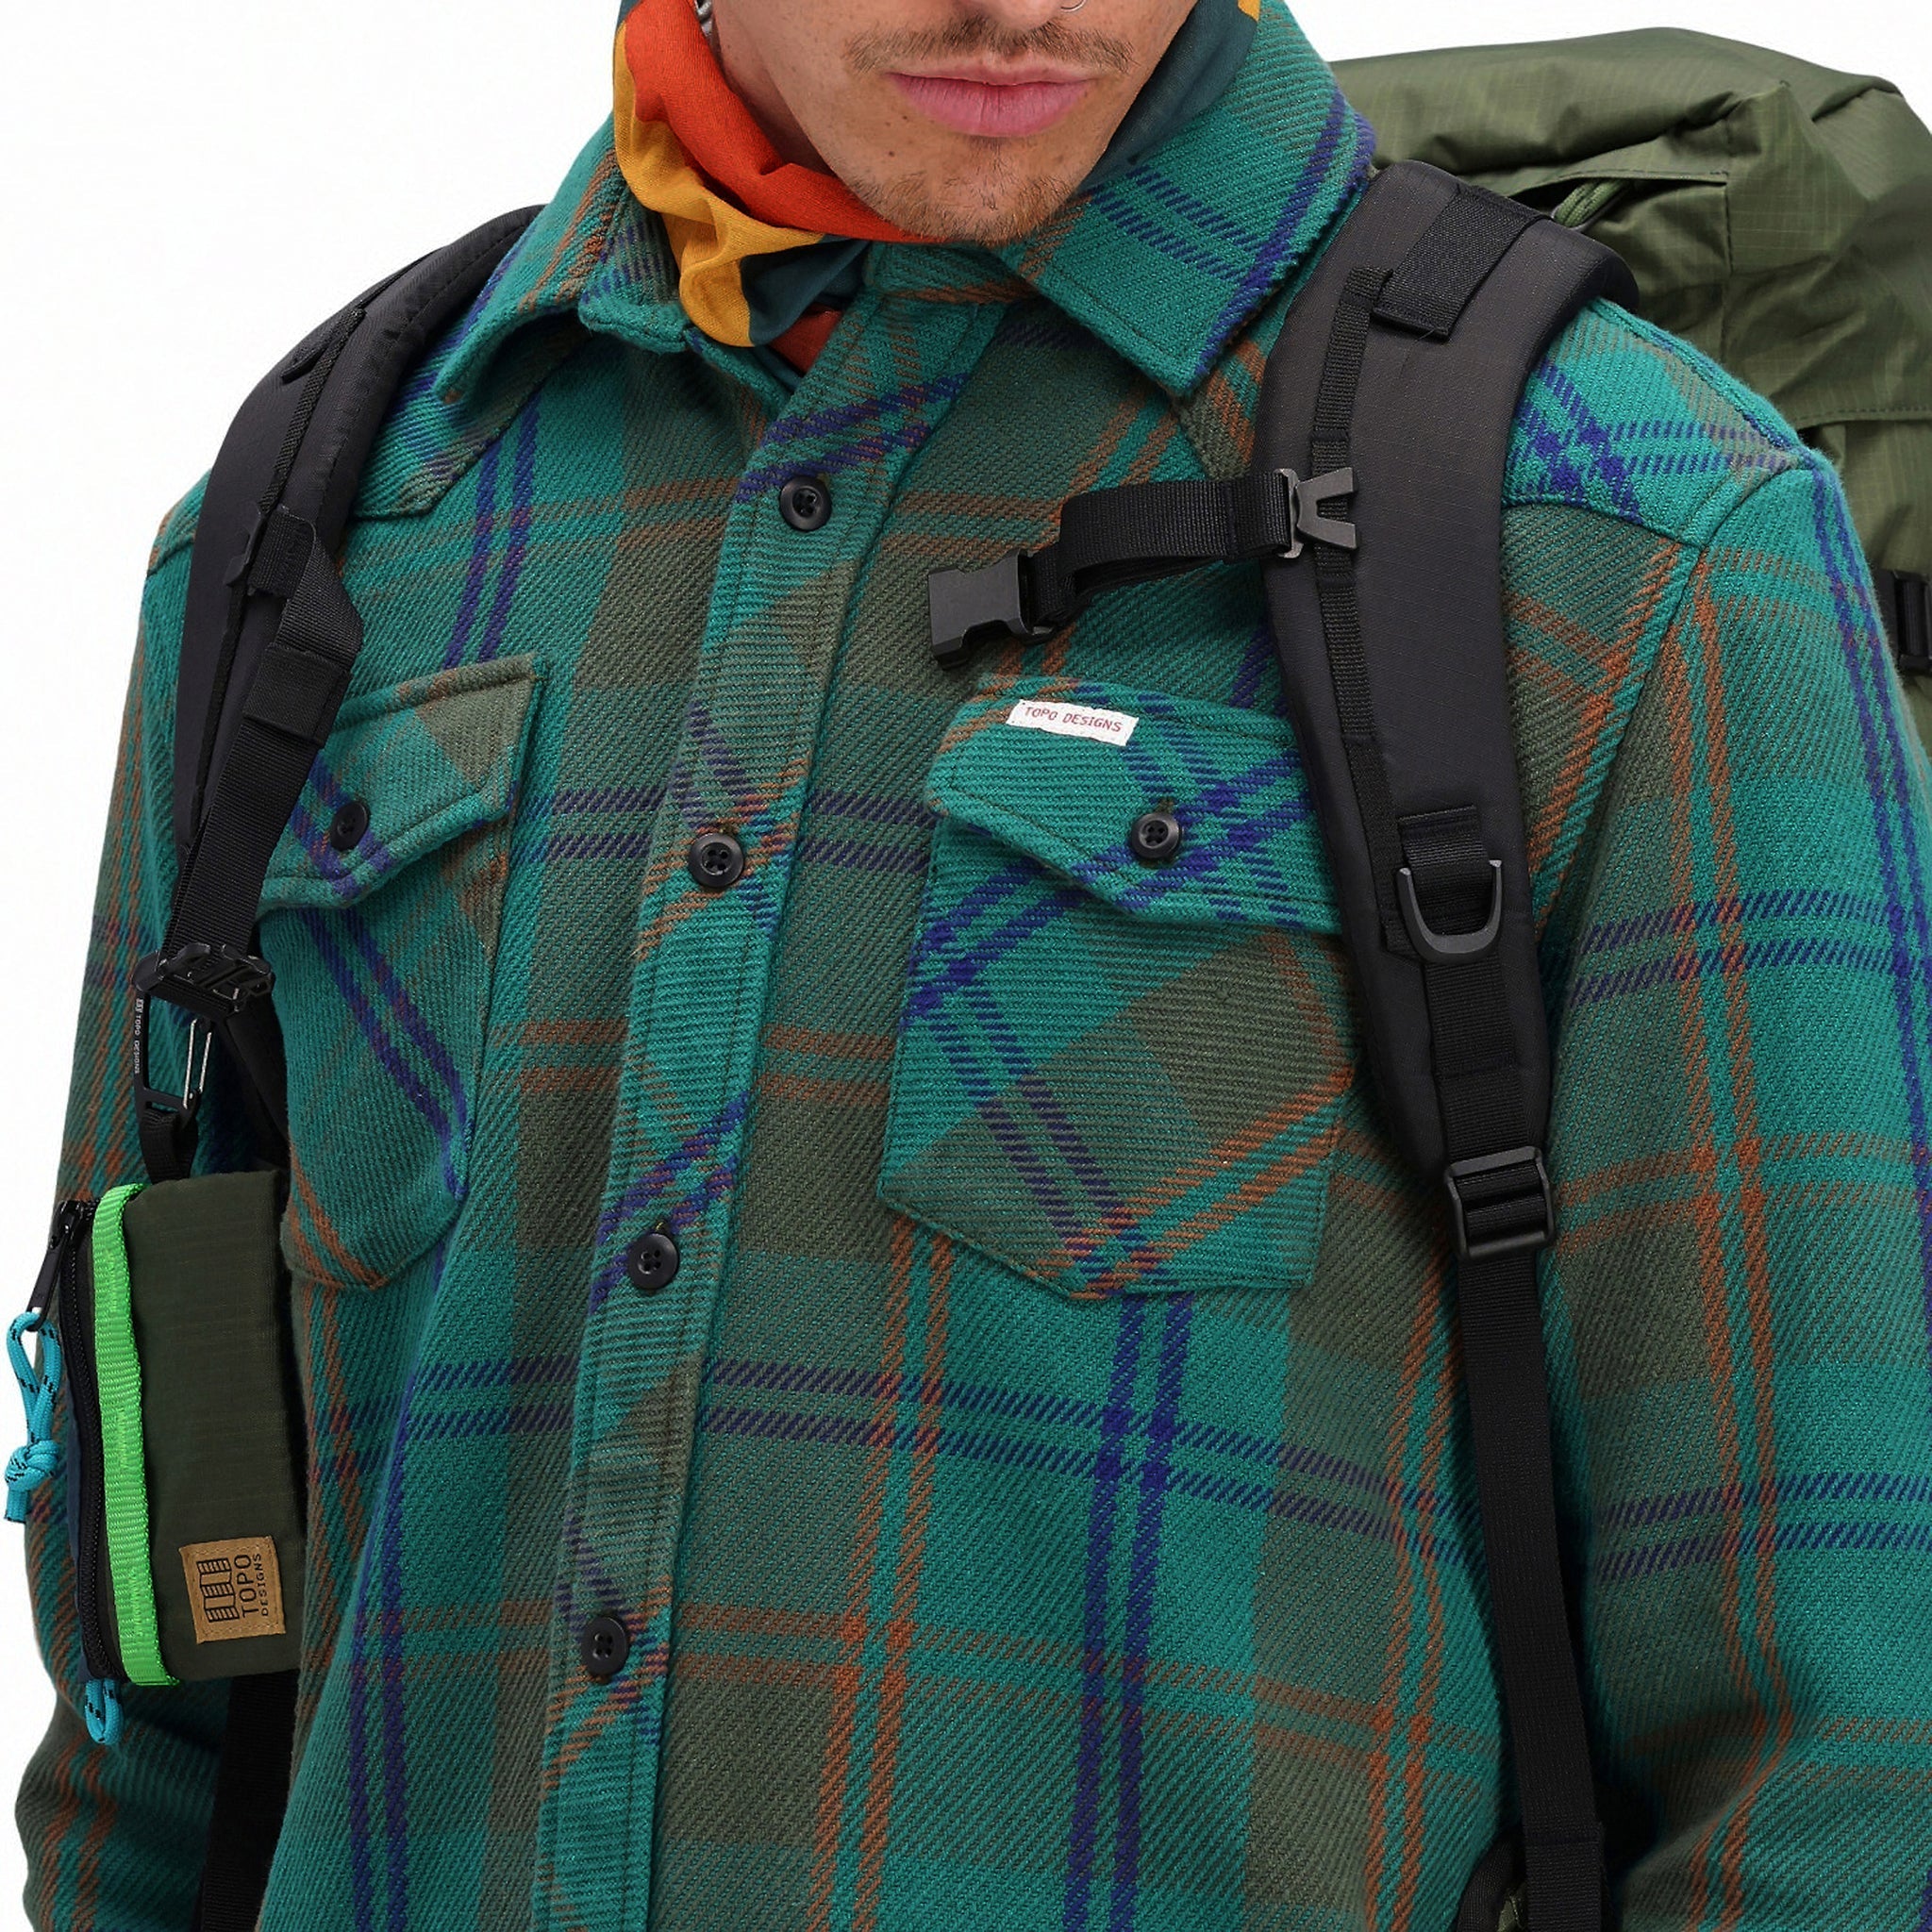 Veste-chemise Insulated - Homme – Topo Designs - Europe